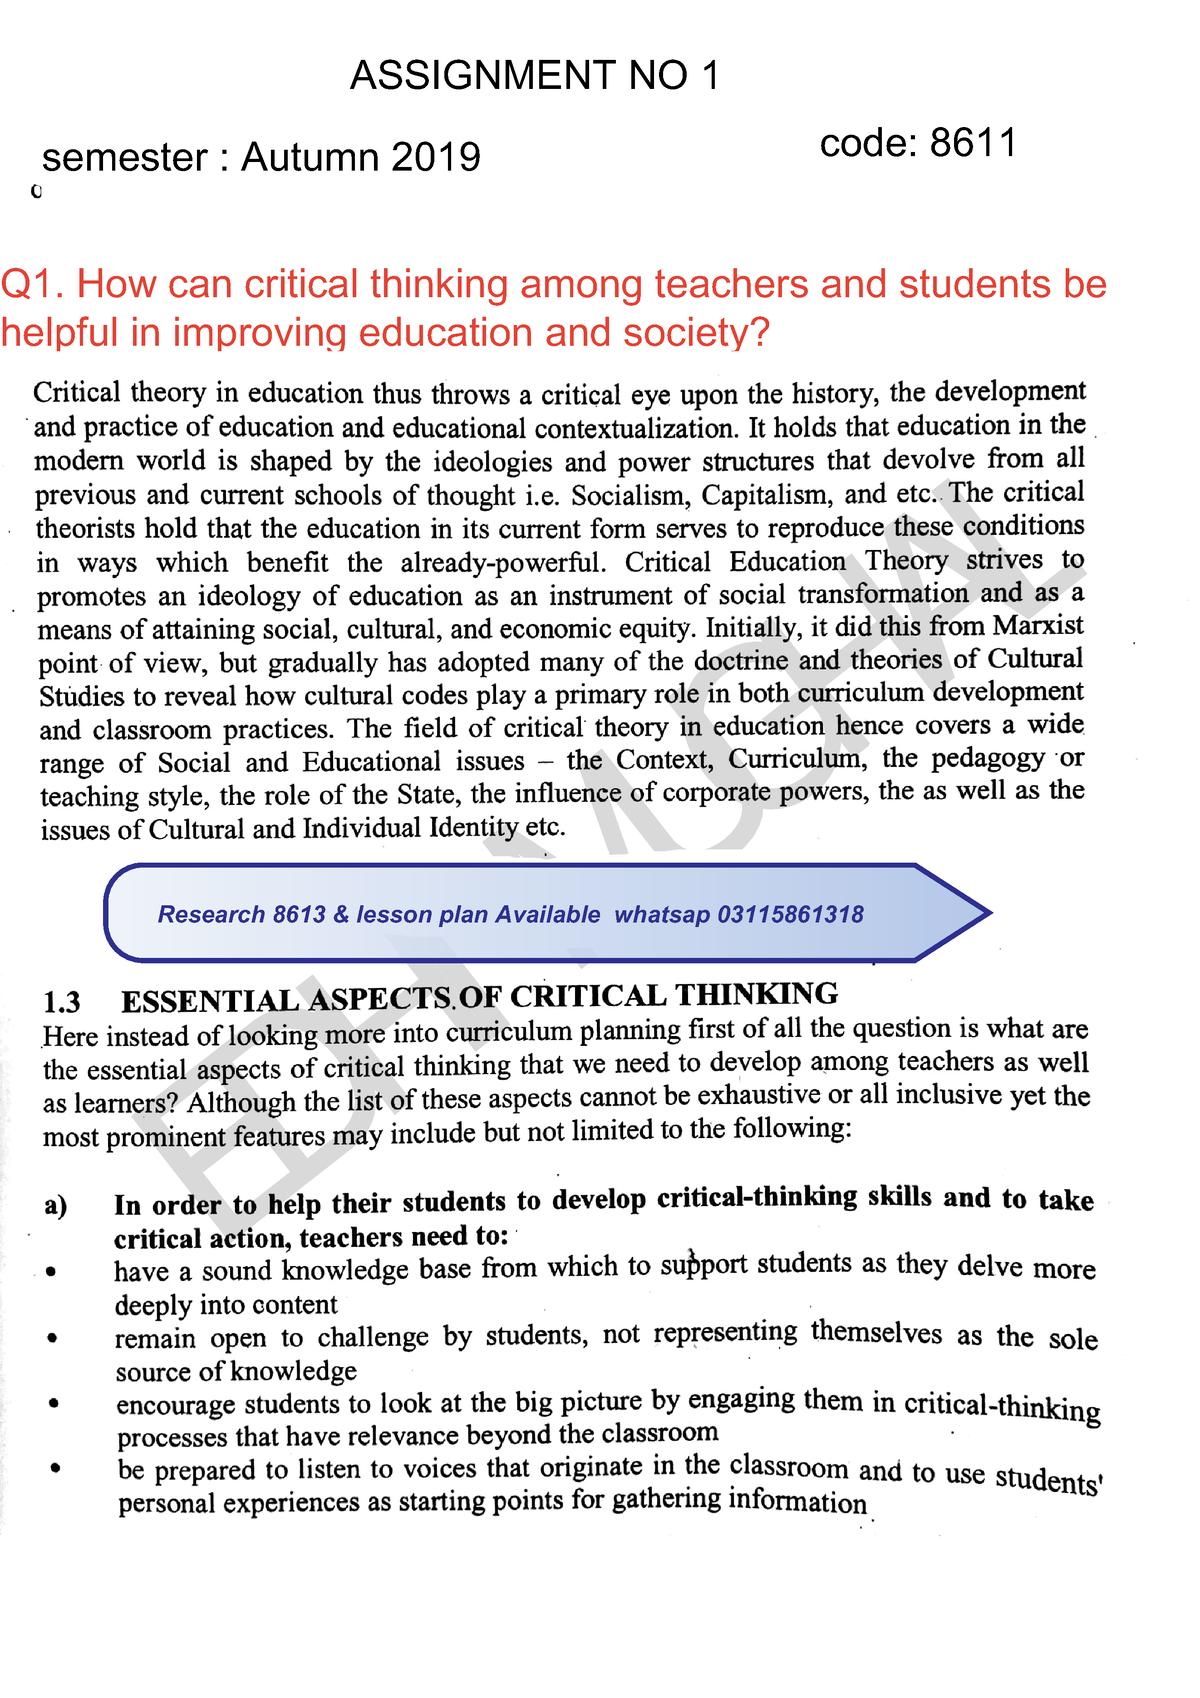 critical thinking and reflective practices 8611 pdf